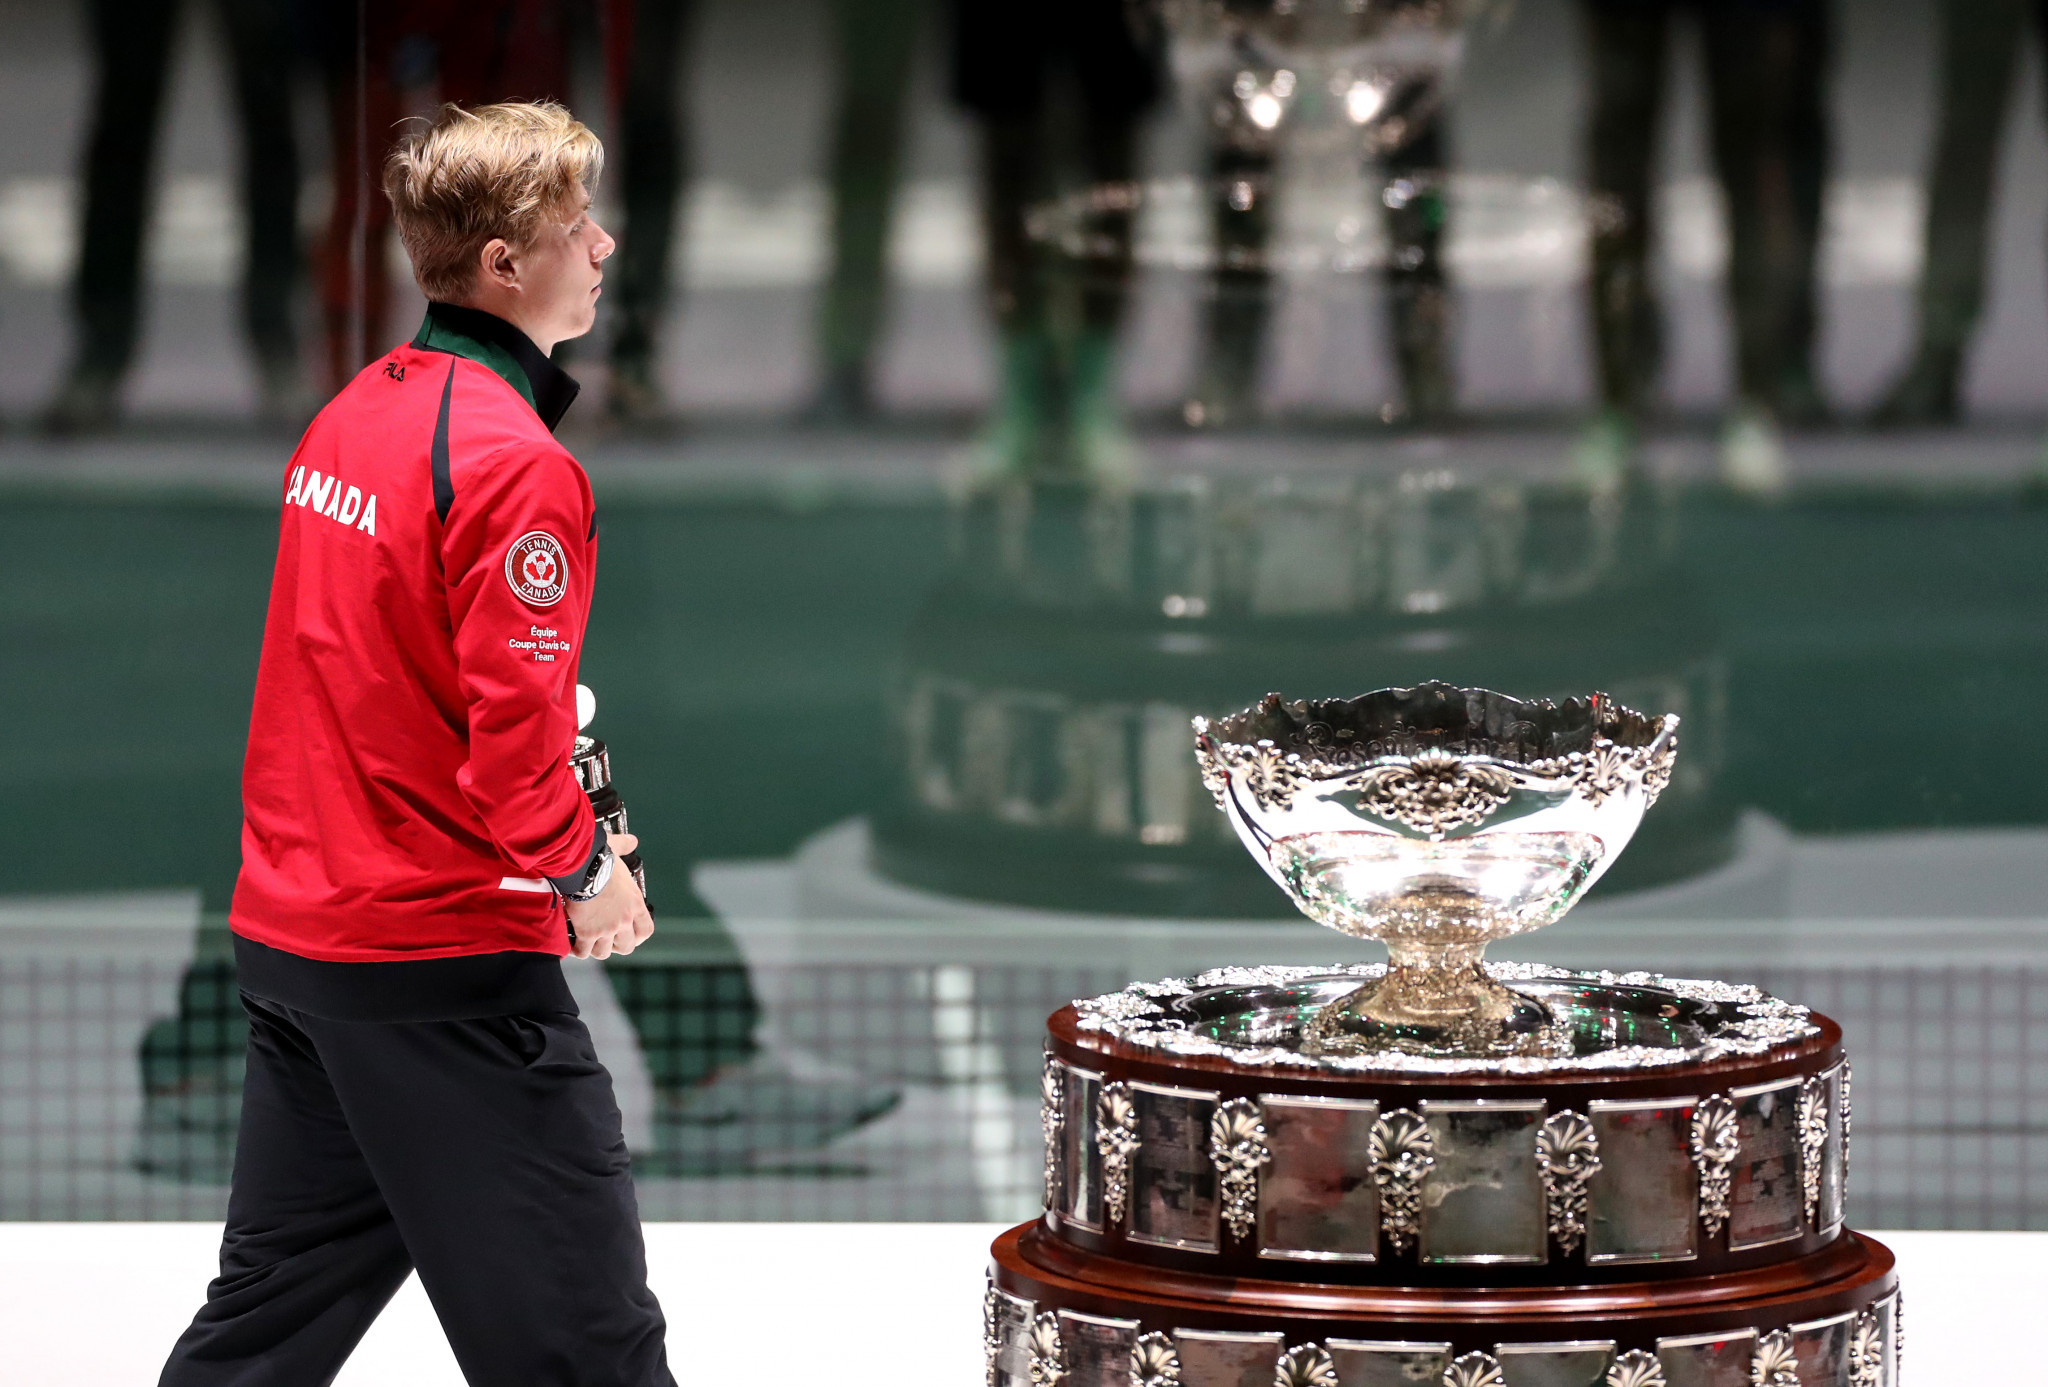 Finals of 2020 Davis Cup and Fed Cup move to 2021 due to coronavirus